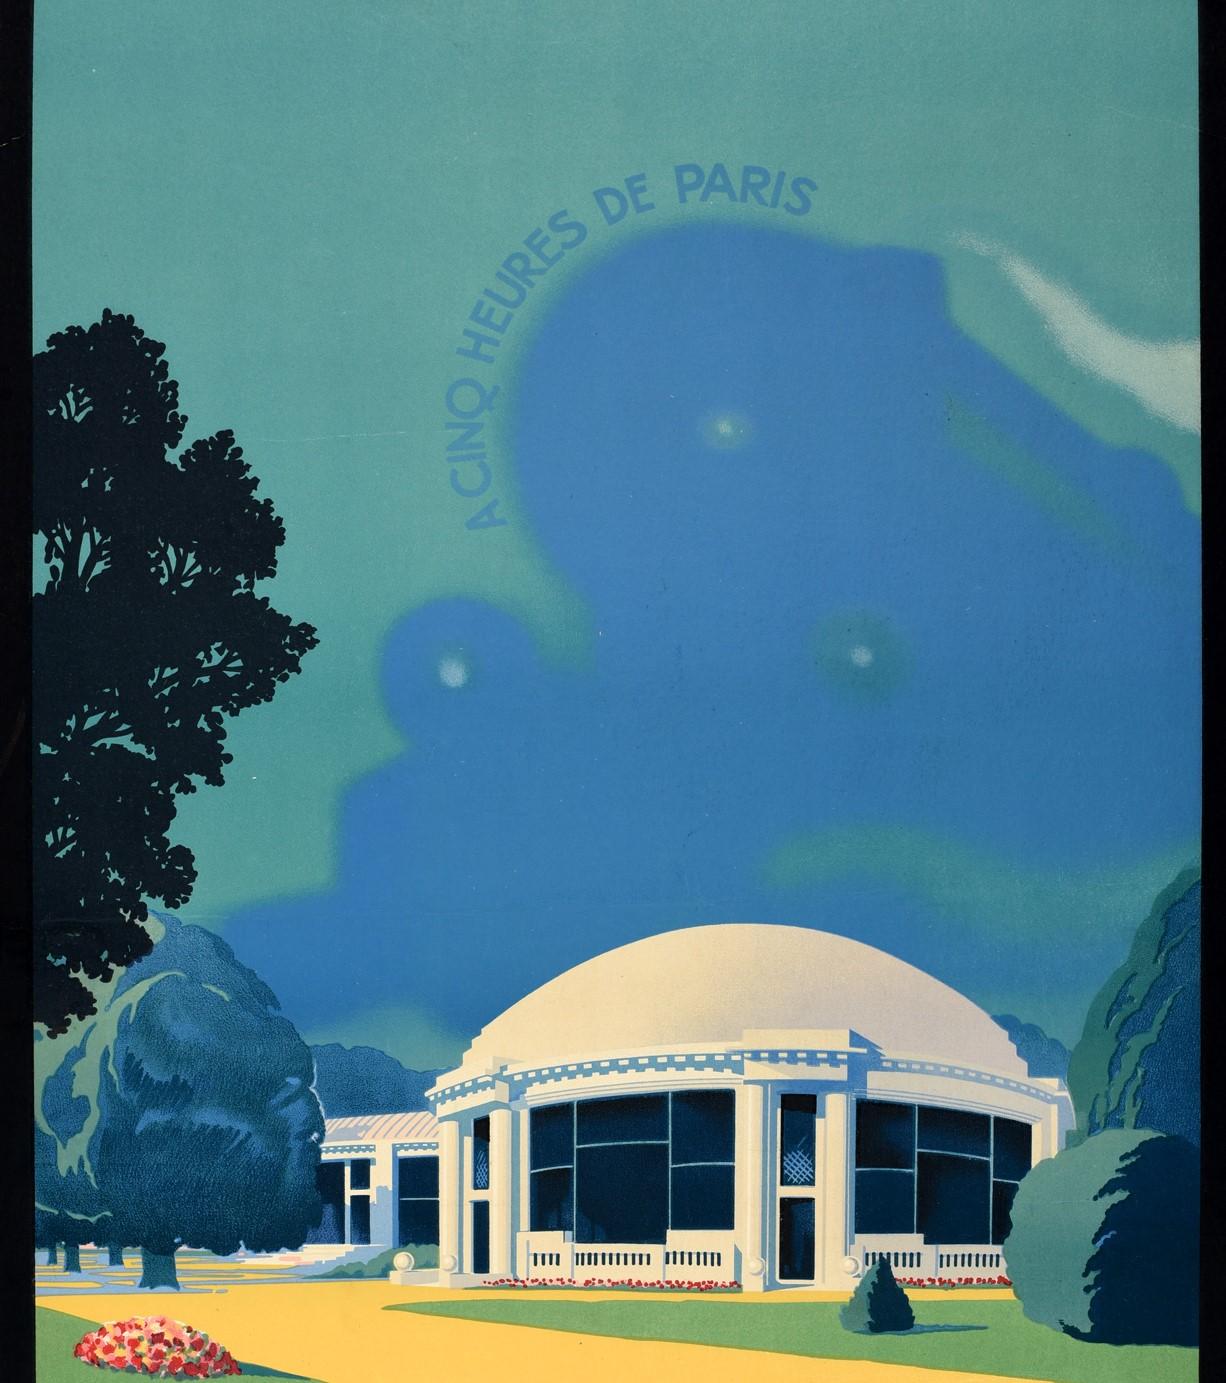 Original vintage railway poster advertising summer travel by train from 25 May to 25 September to the spa resort town of Vittel in north-east France in five hours from Paris - La Grande Source Vittel Vosges a cinq heures de Paris Chemins de Fer de